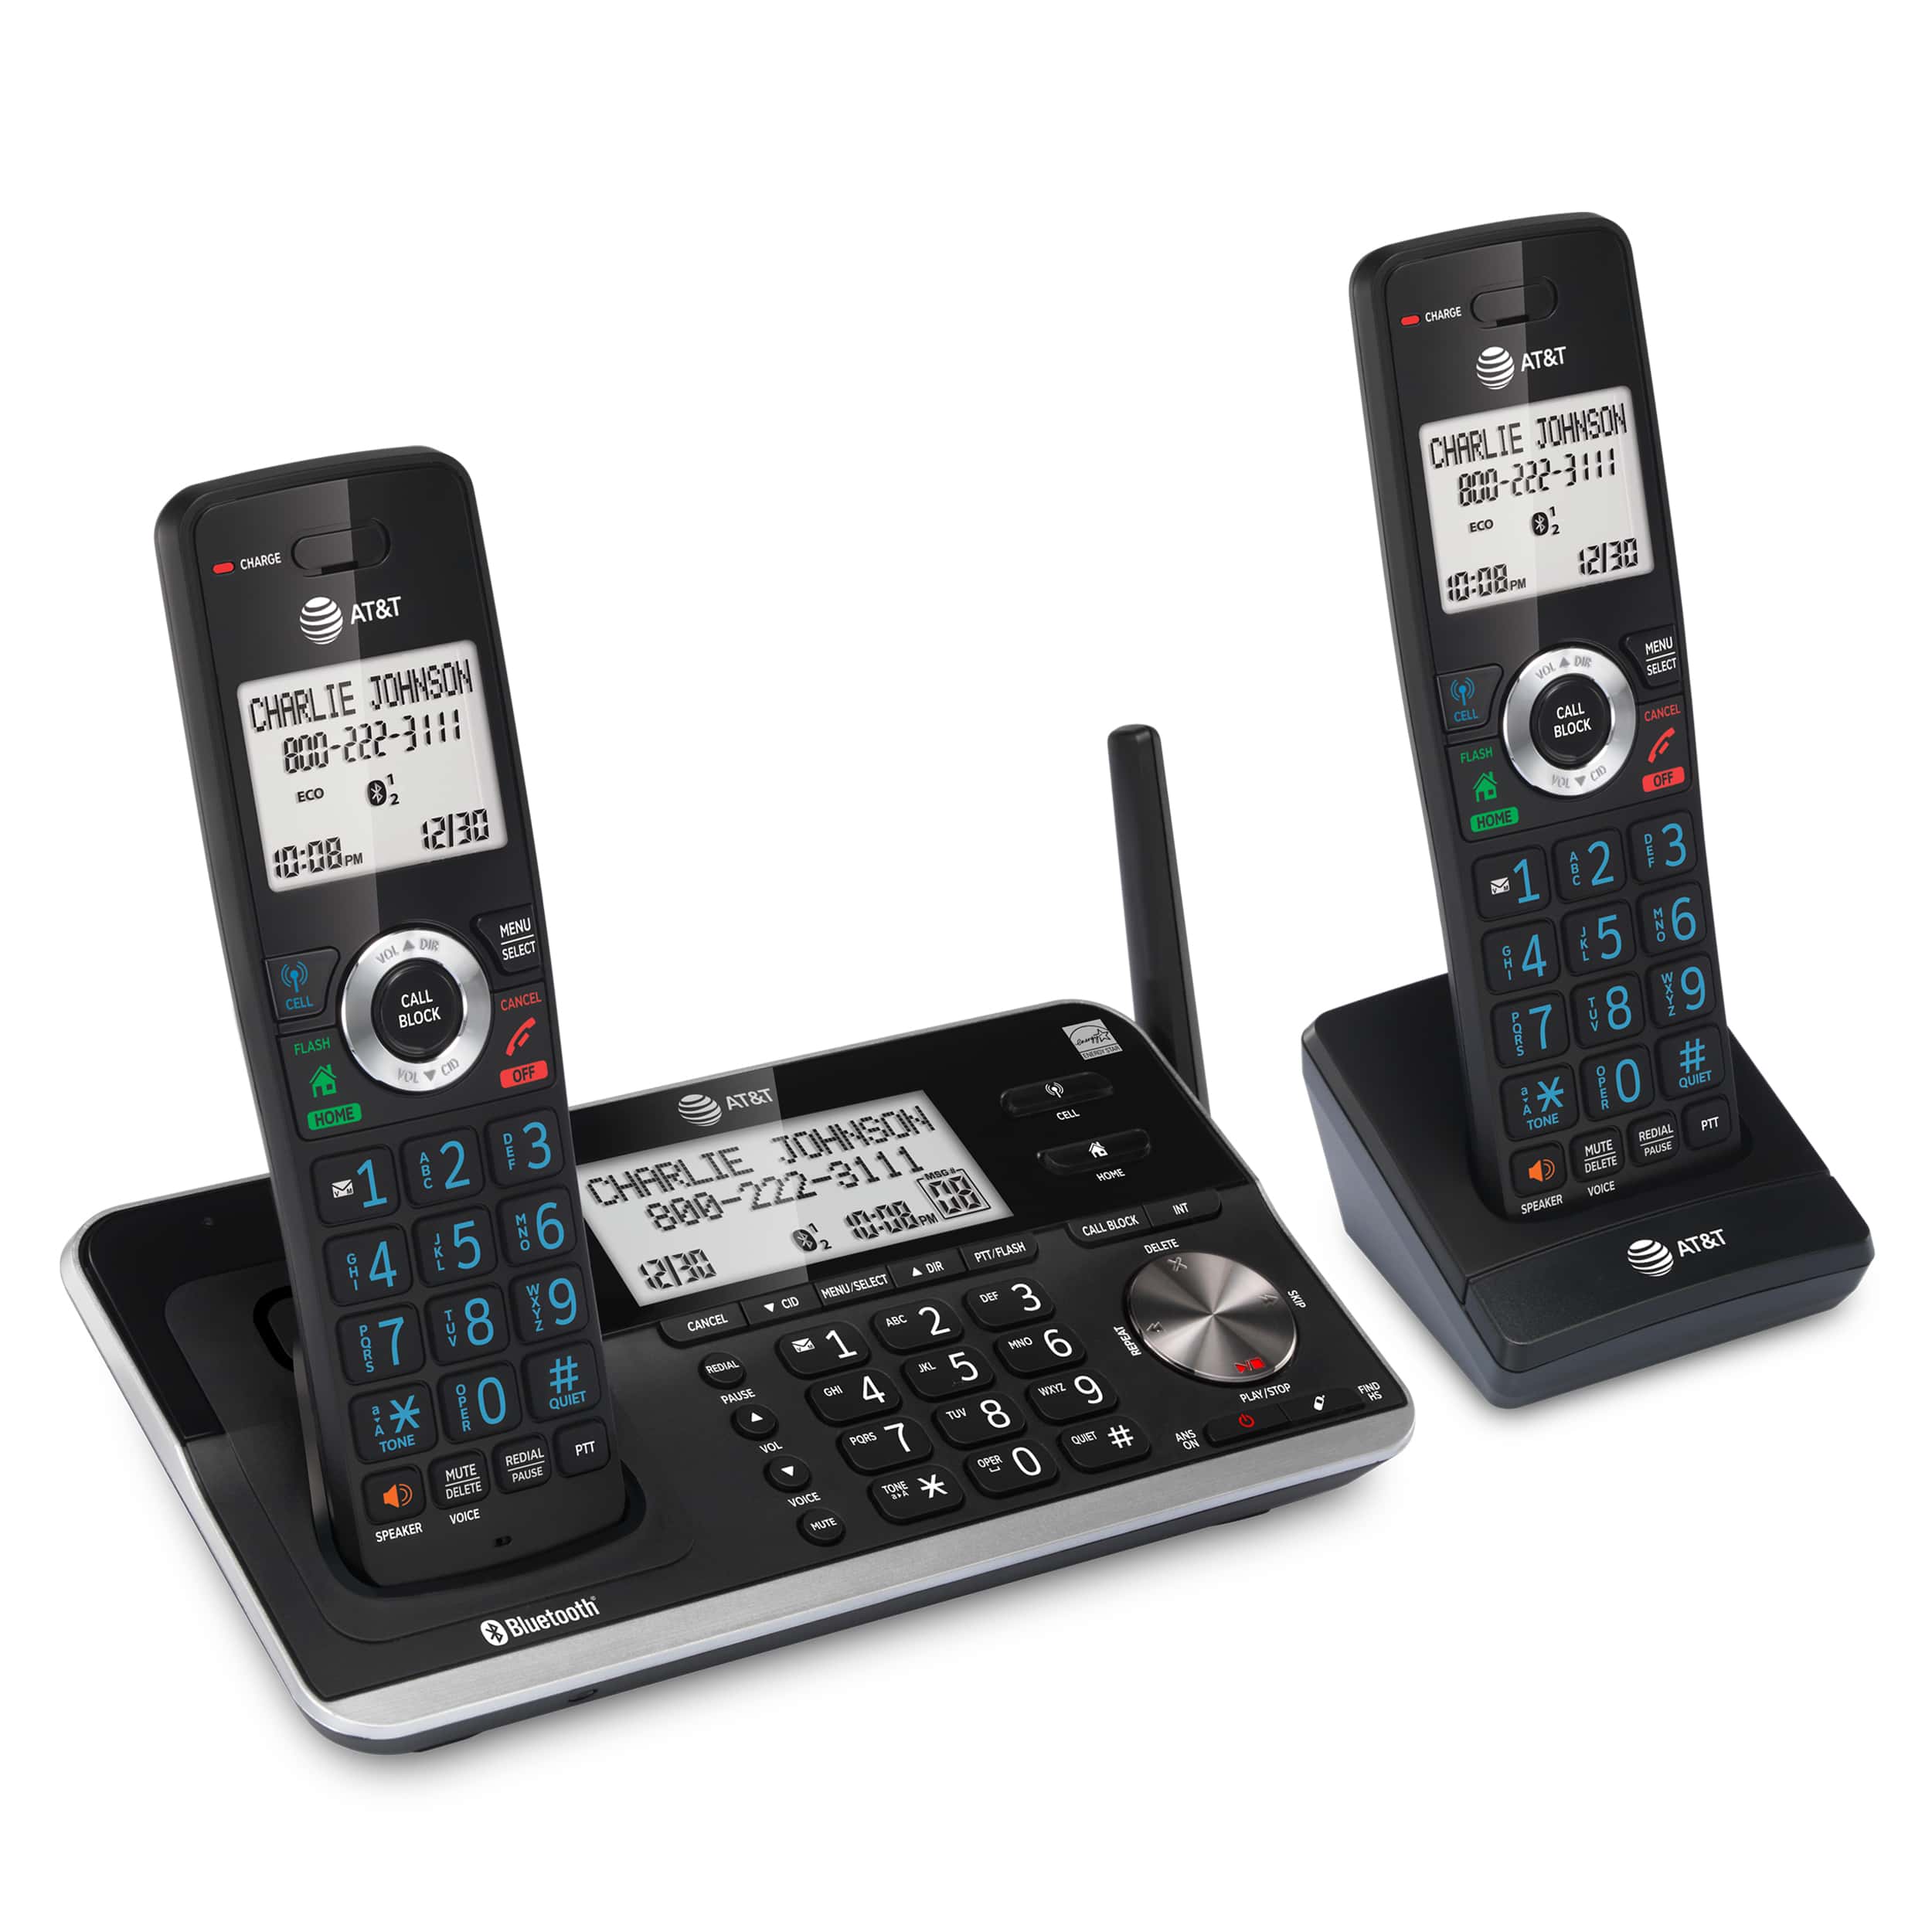 2-Handset Expandable Cordless Phone with Unsurpassed Range, Bluetooth Connect to Cell™, Smart Call Blocker and Answering System, DLP73210 - view 2